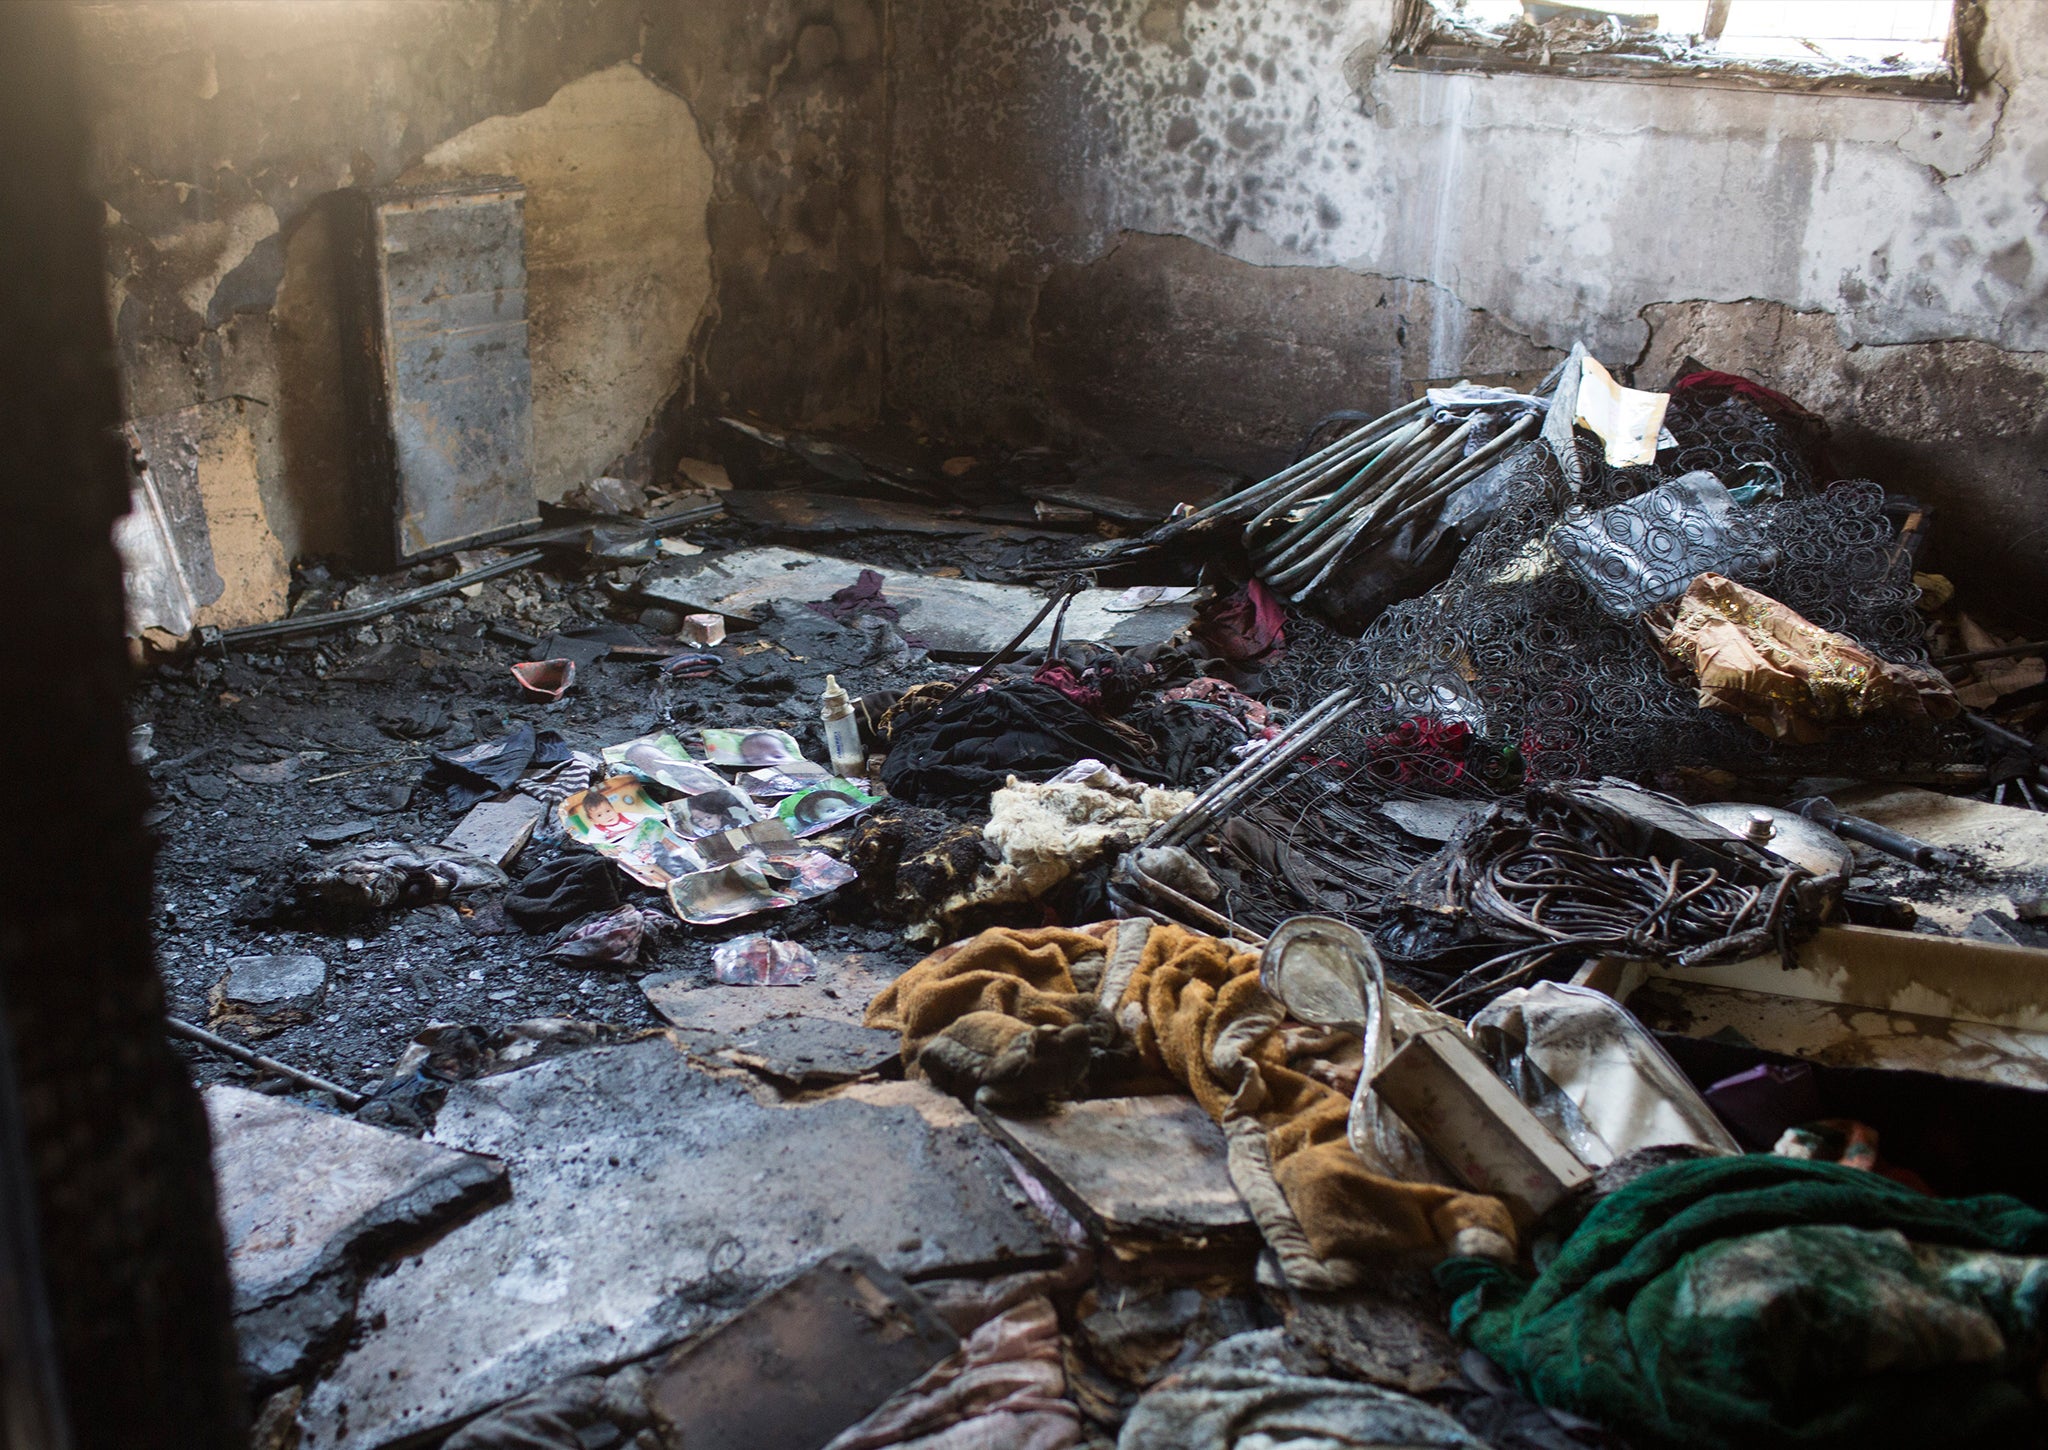 The remains of the Dawabsheh house after a fire. It was suspected to have been set by Jewish extremists on July 31, 2015 in the Palestinian village of Duma, West Bank